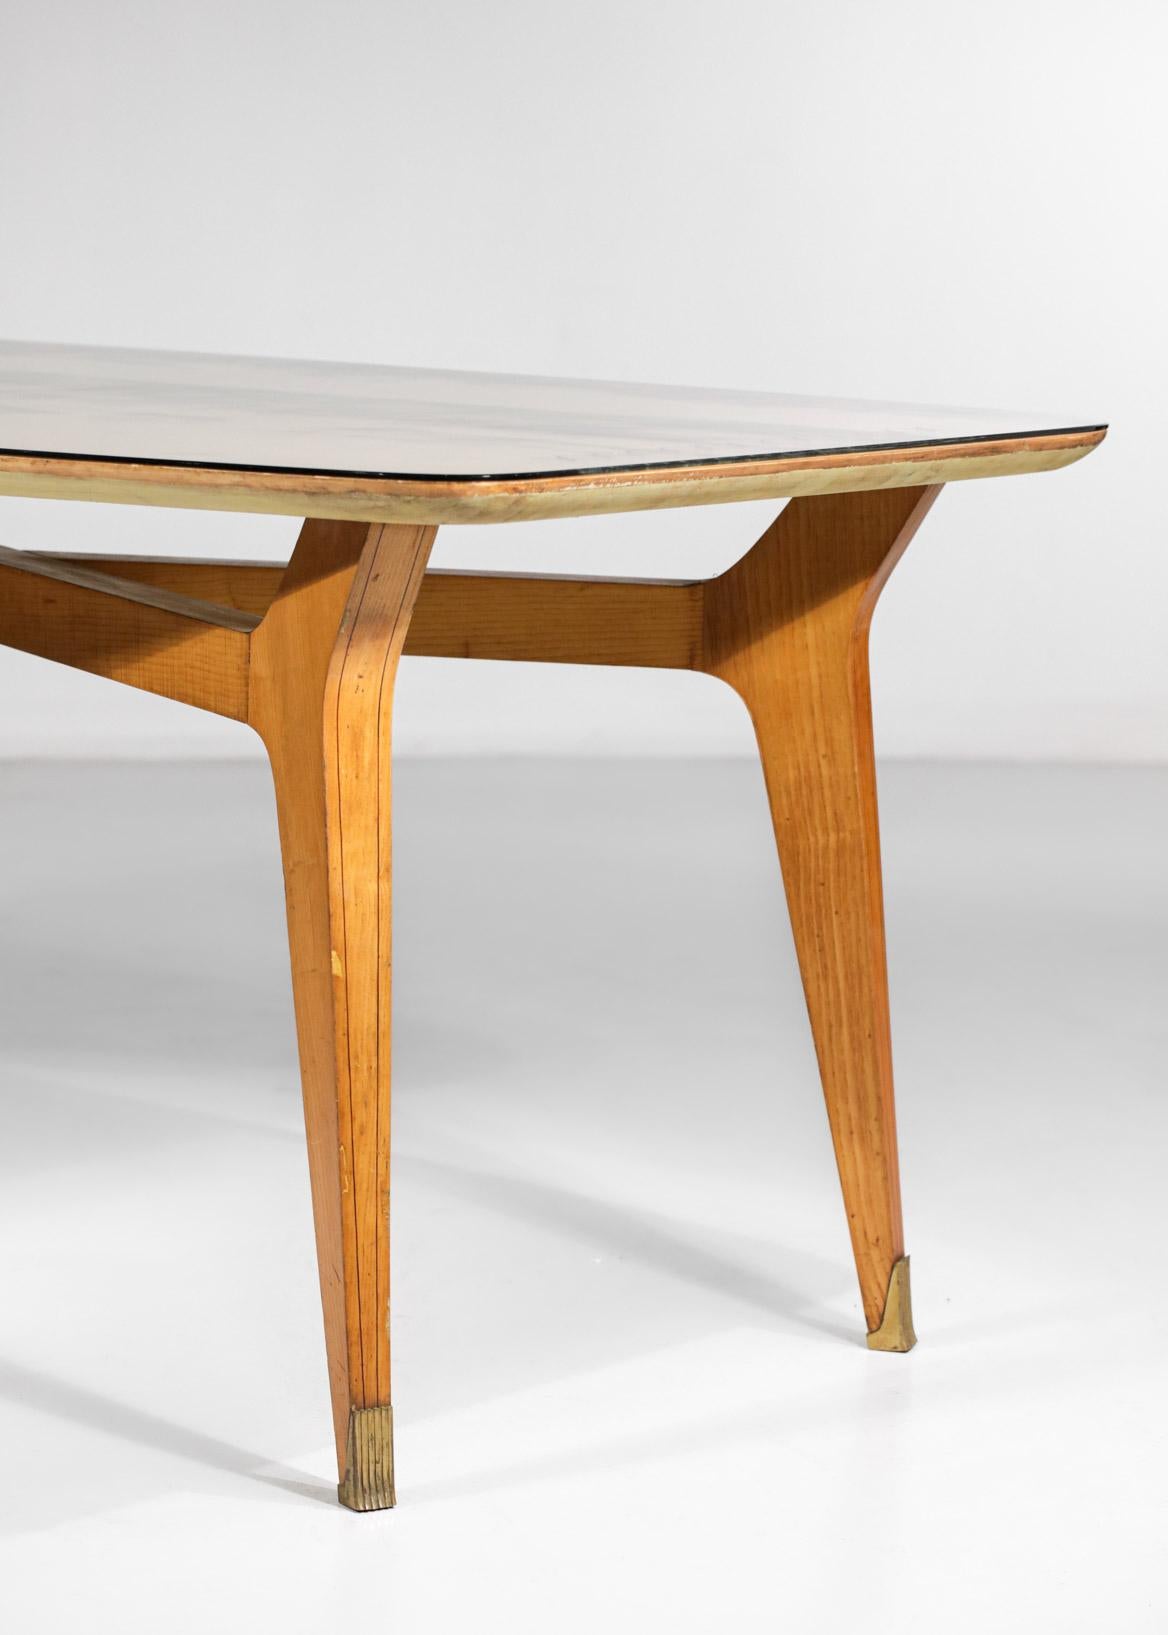 Mid-20th Century Italian Dining Table Solid Beech and Engraved Glass 60's in Style of Gio Ponti For Sale